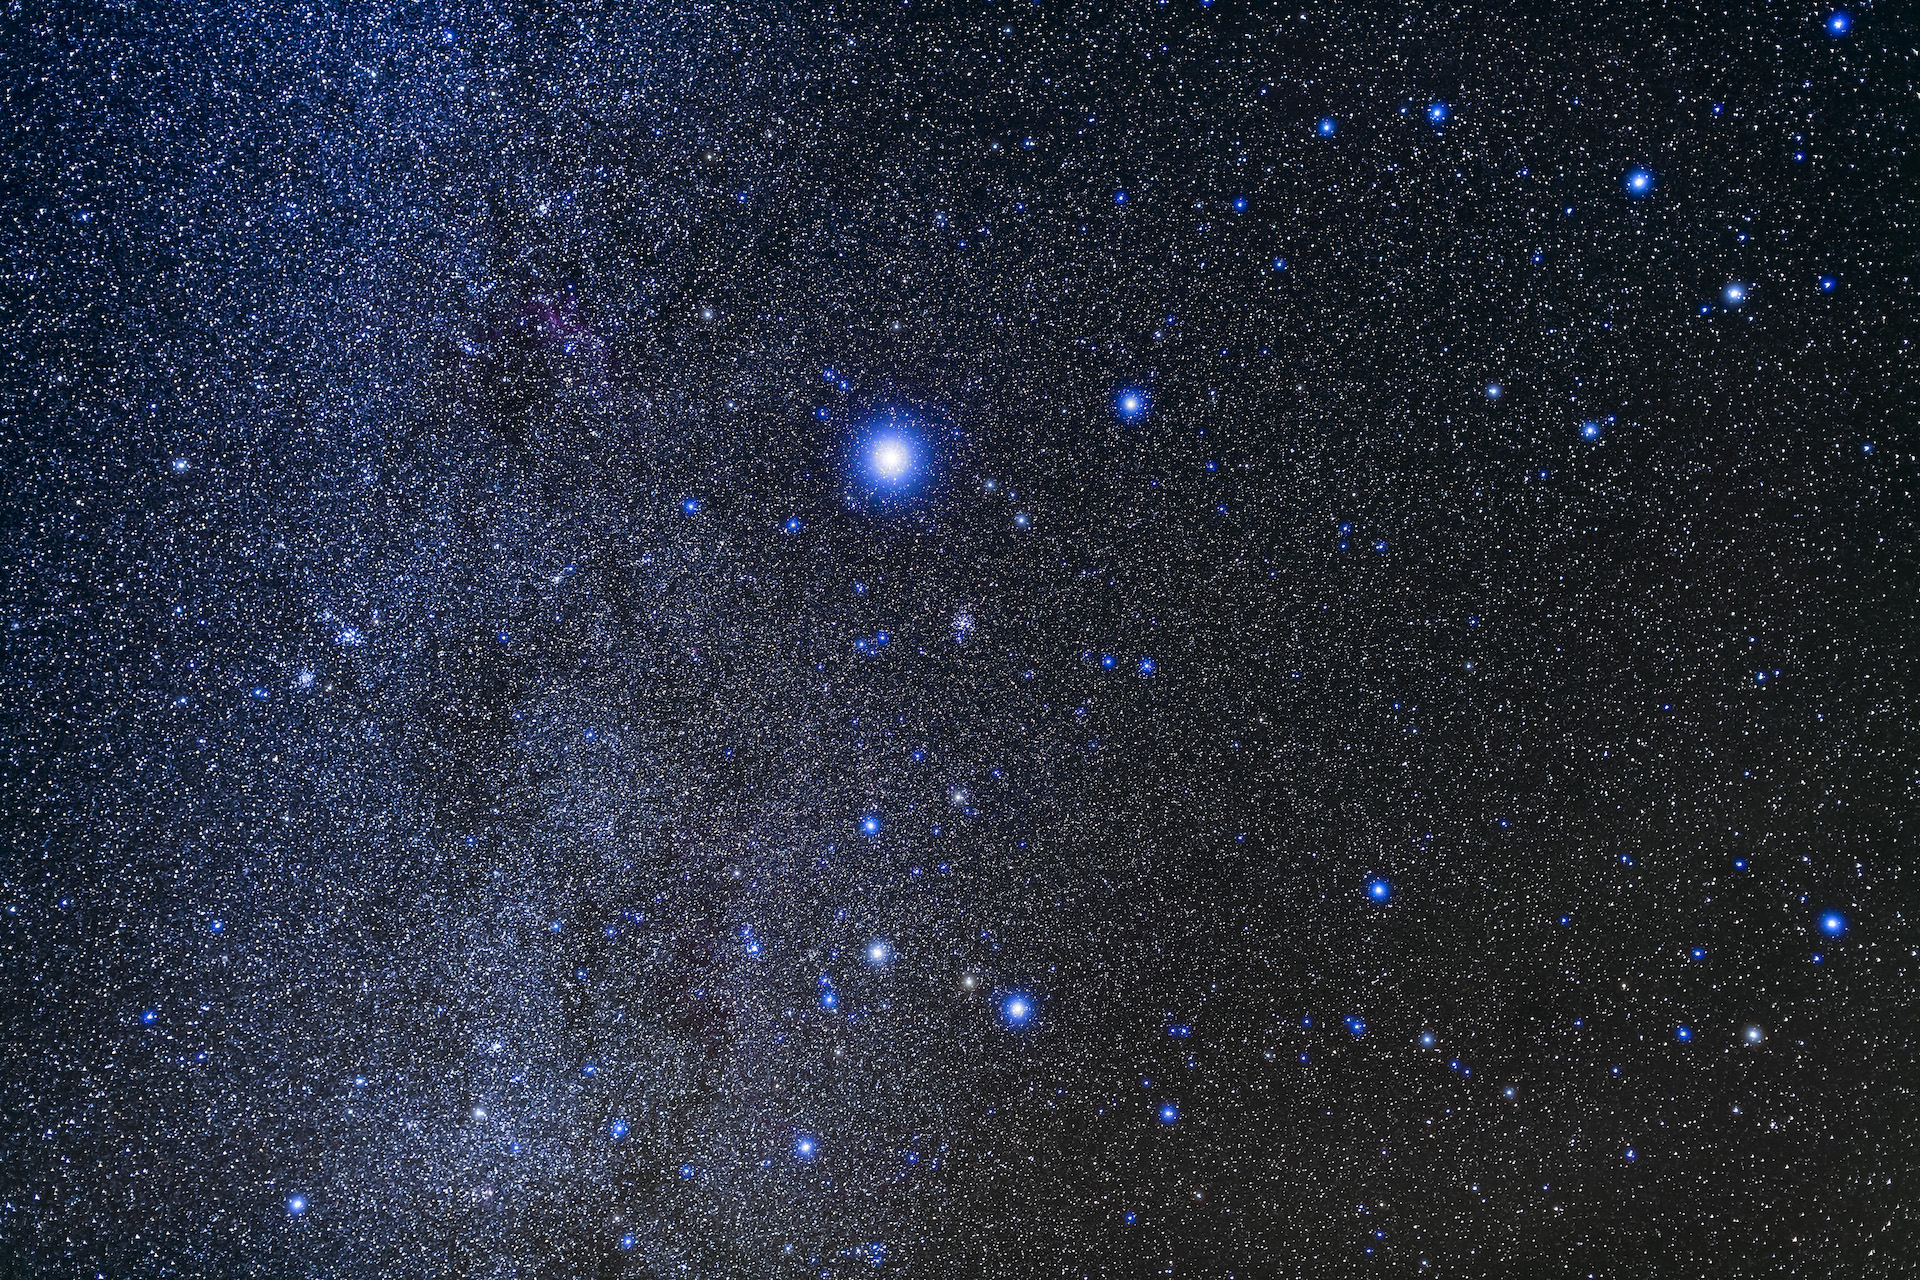 Sirus, the brightest star in the night sky, is a binary star consisting of a Sirius B, a massive white dwarf and Sirius A, an A-type main sequence star.